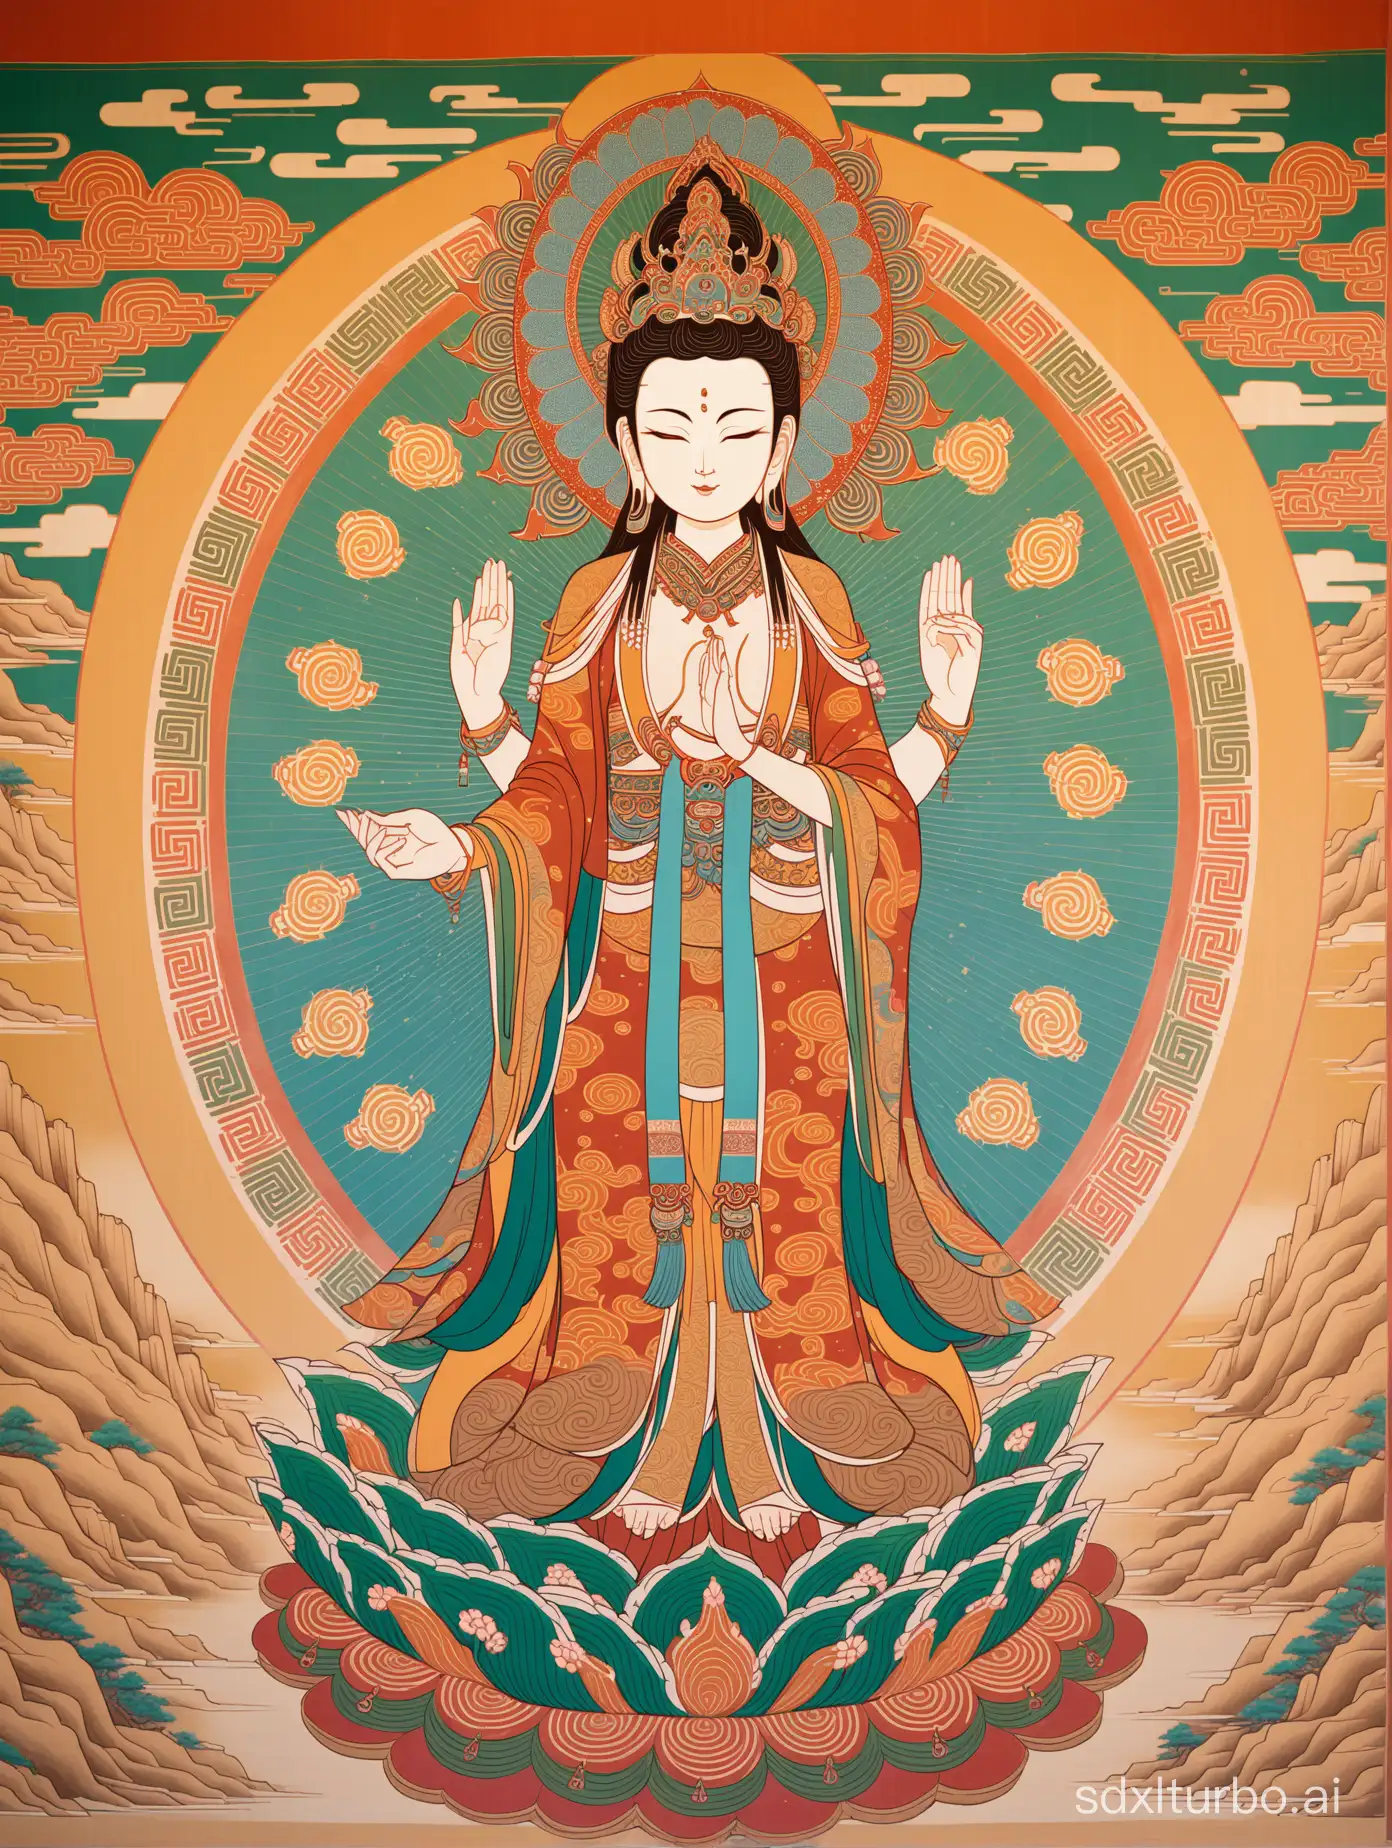 Statue of Thousand-Hand Guanyin, Dunhuang mural style